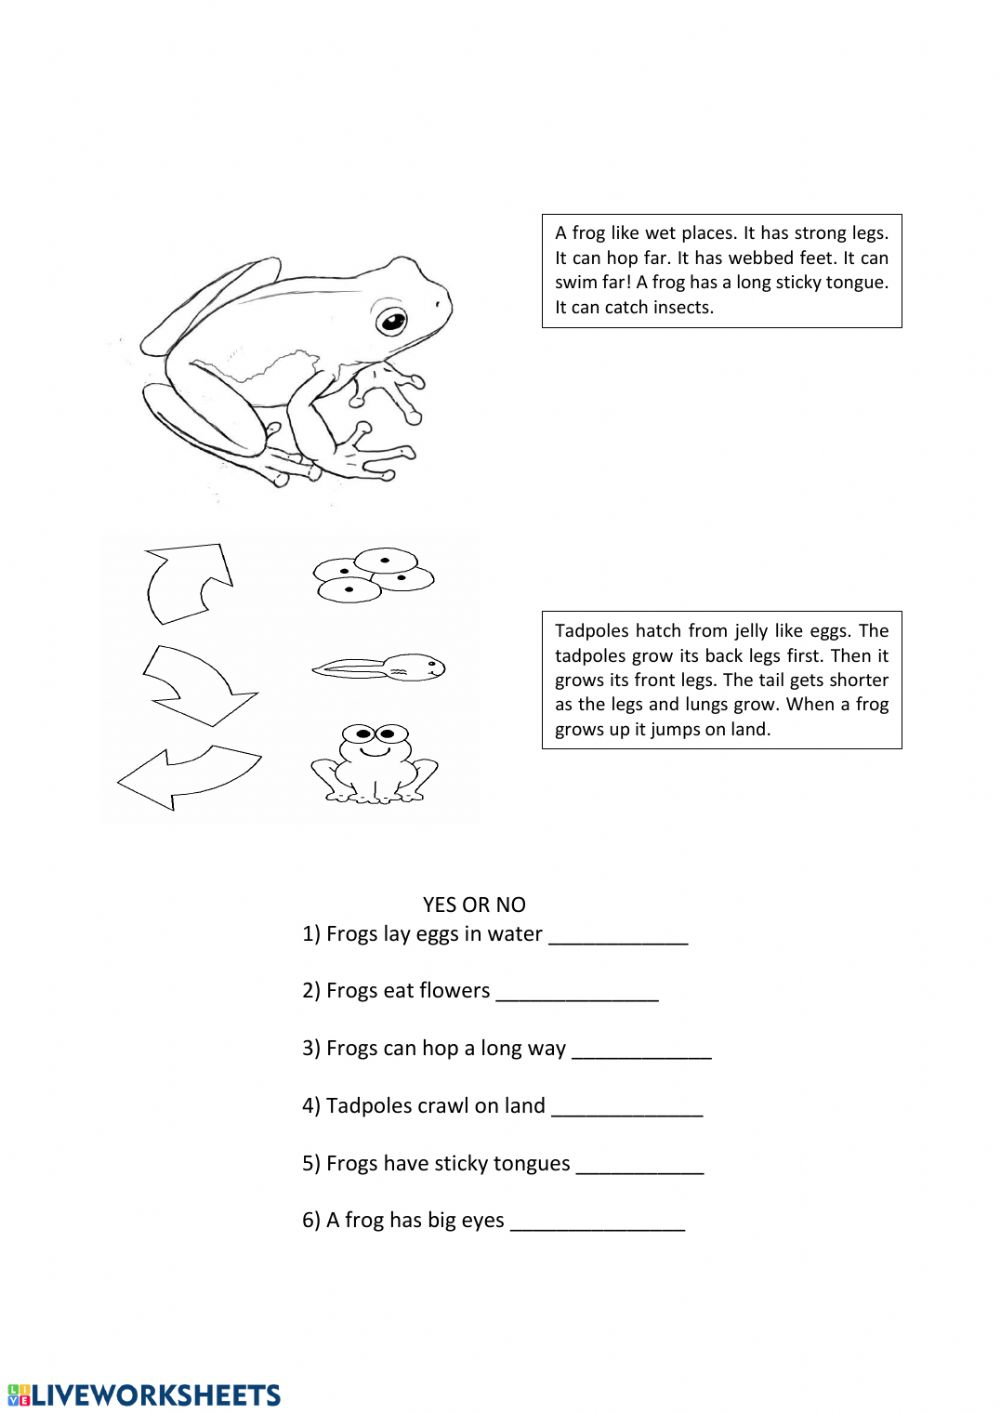 life-cycle-of-a-frog-interactive-worksheet-freeprintable-me